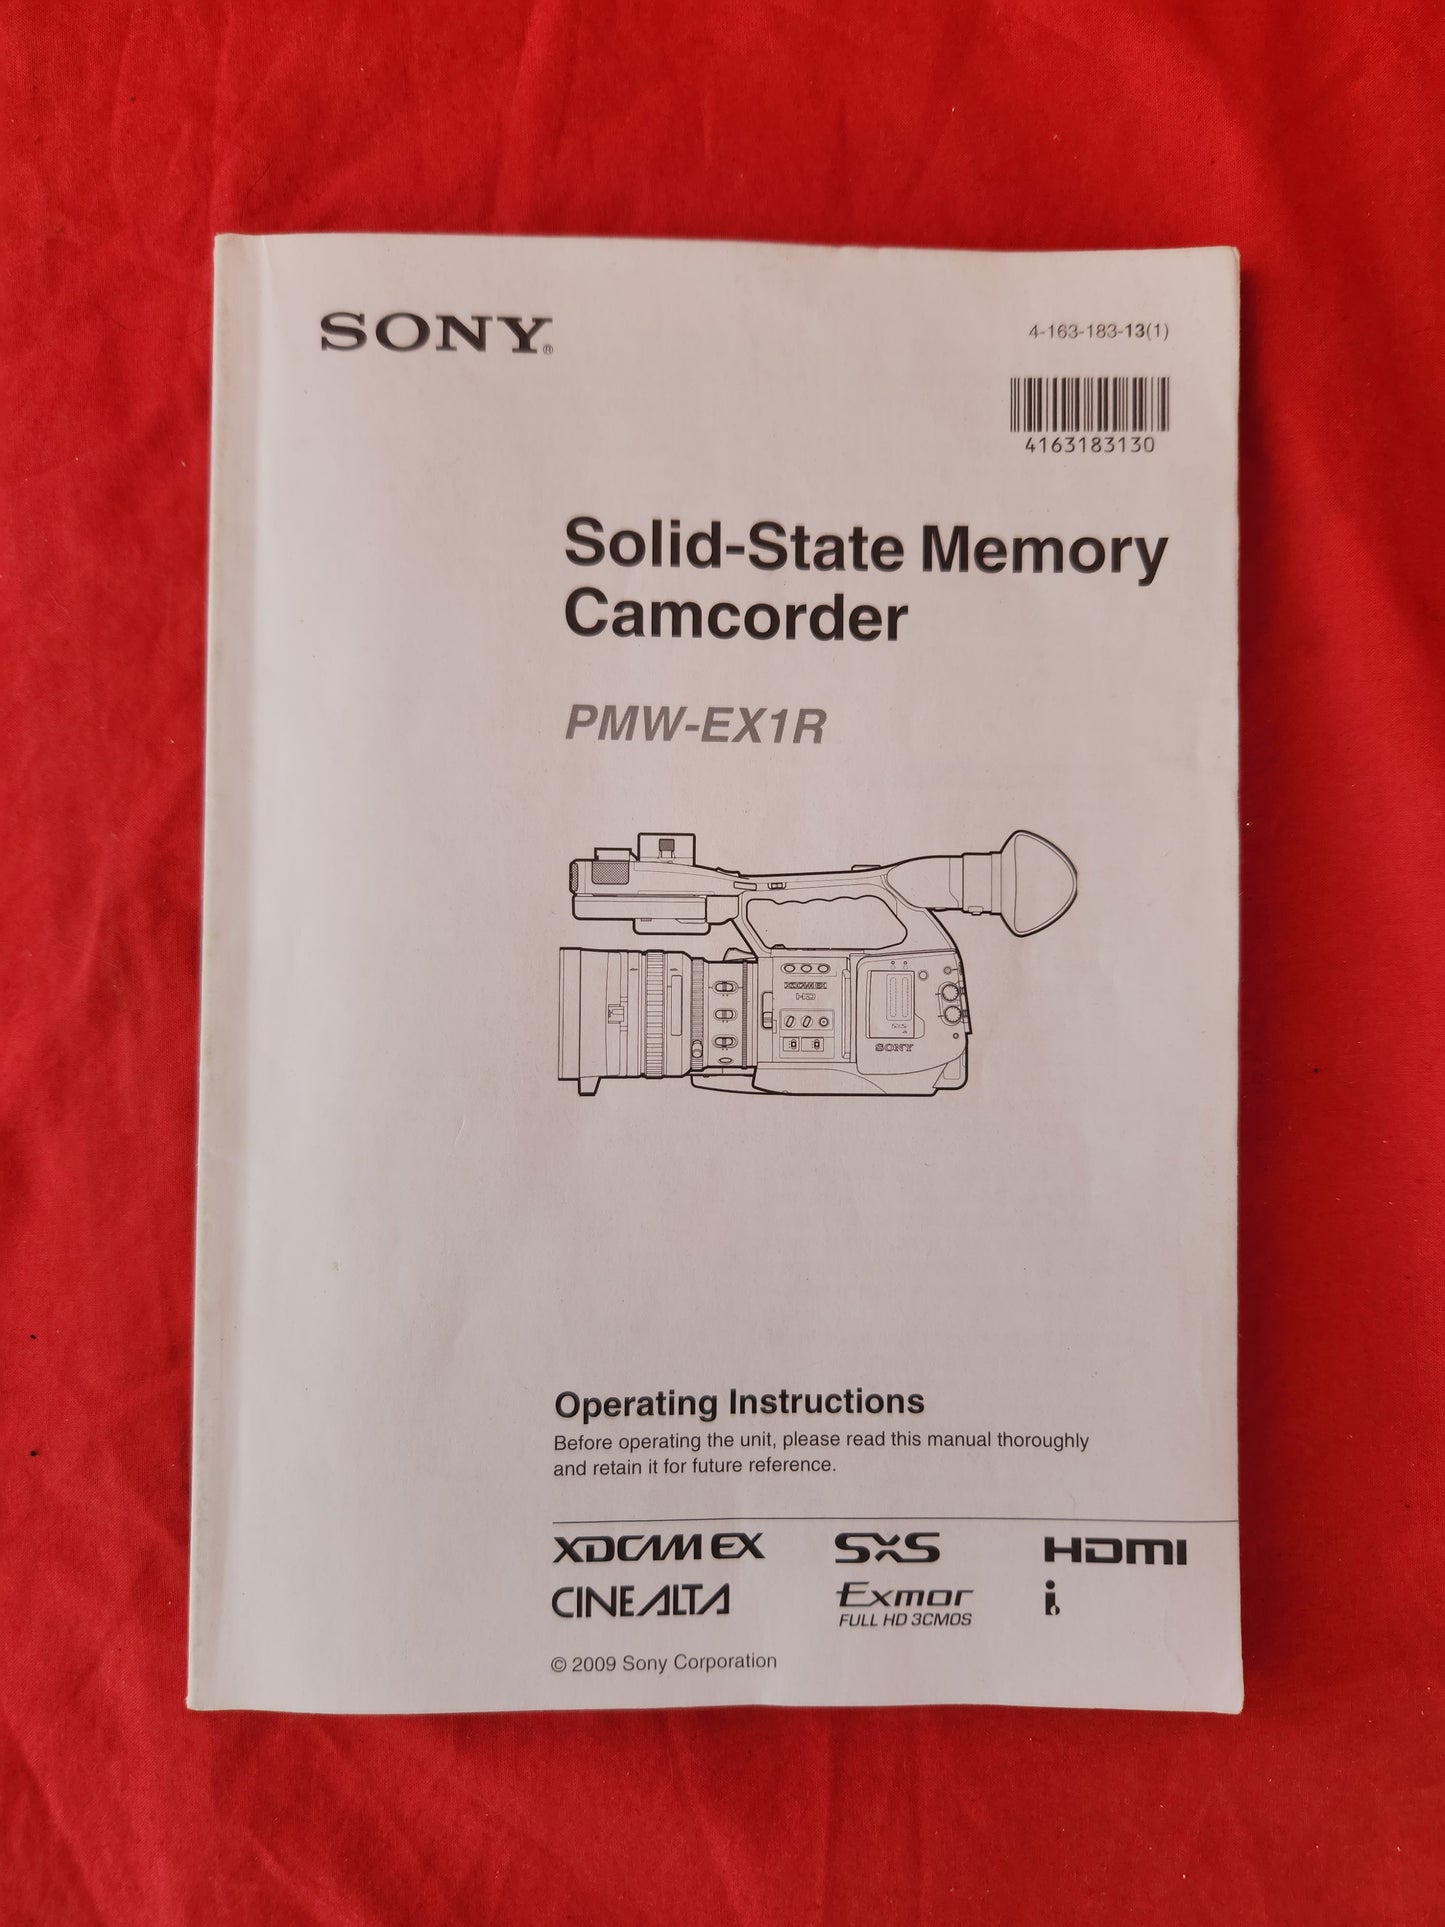 Sony Solid-State Memory Camcorder PMW-EX1R Operation Instructions